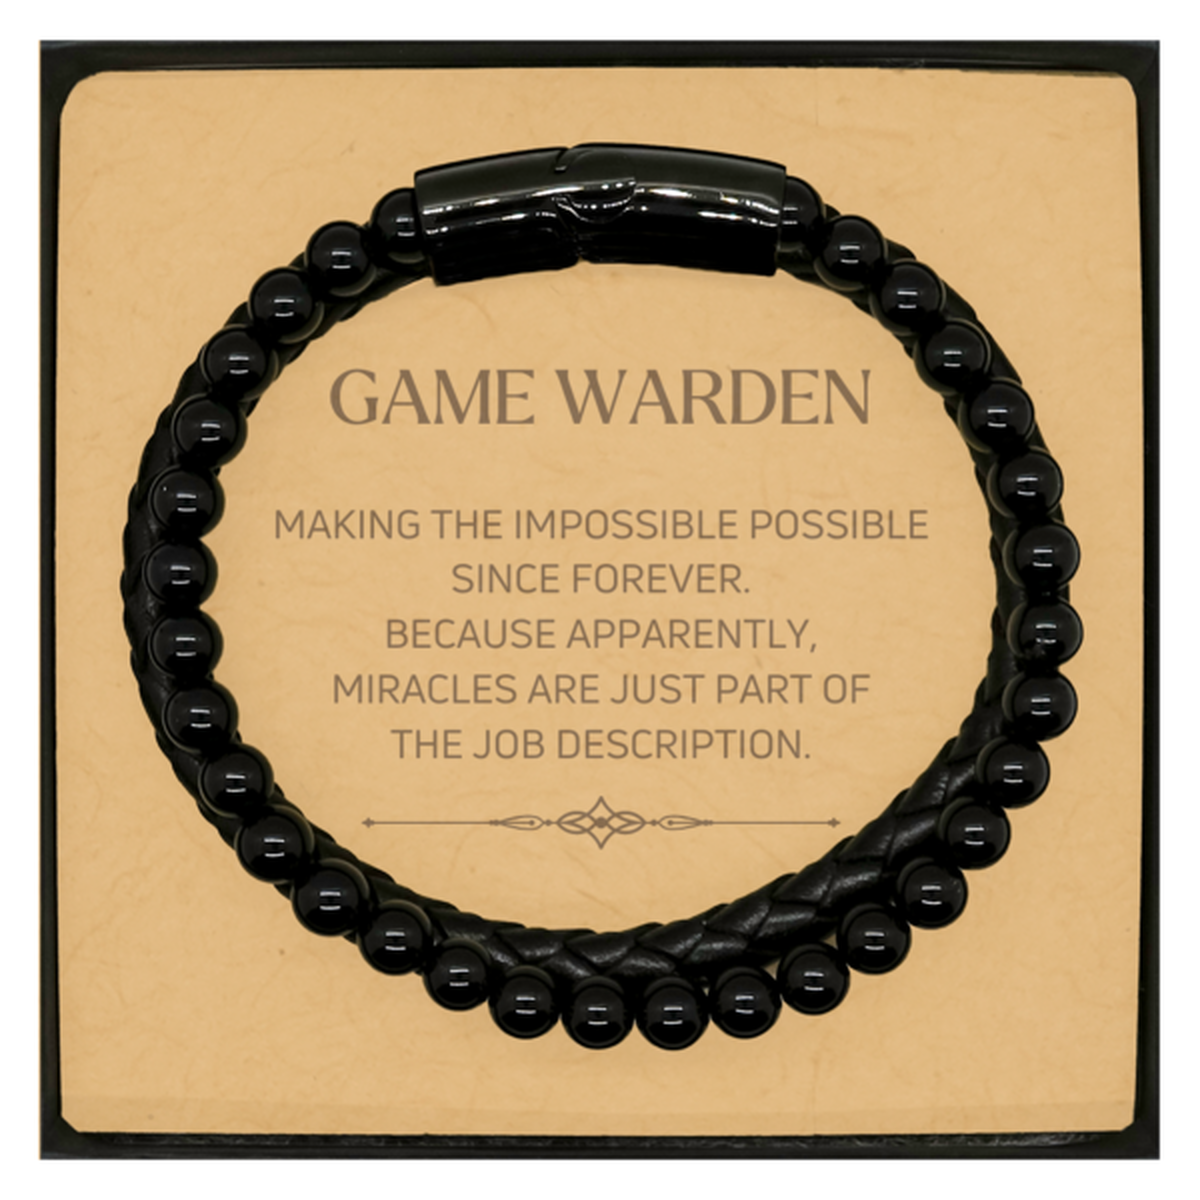 Funny Game Warden Gifts, Miracles are just part of the job description, Inspirational Birthday Christmas Stone Leather Bracelets For Game Warden, Men, Women, Coworkers, Friends, Boss